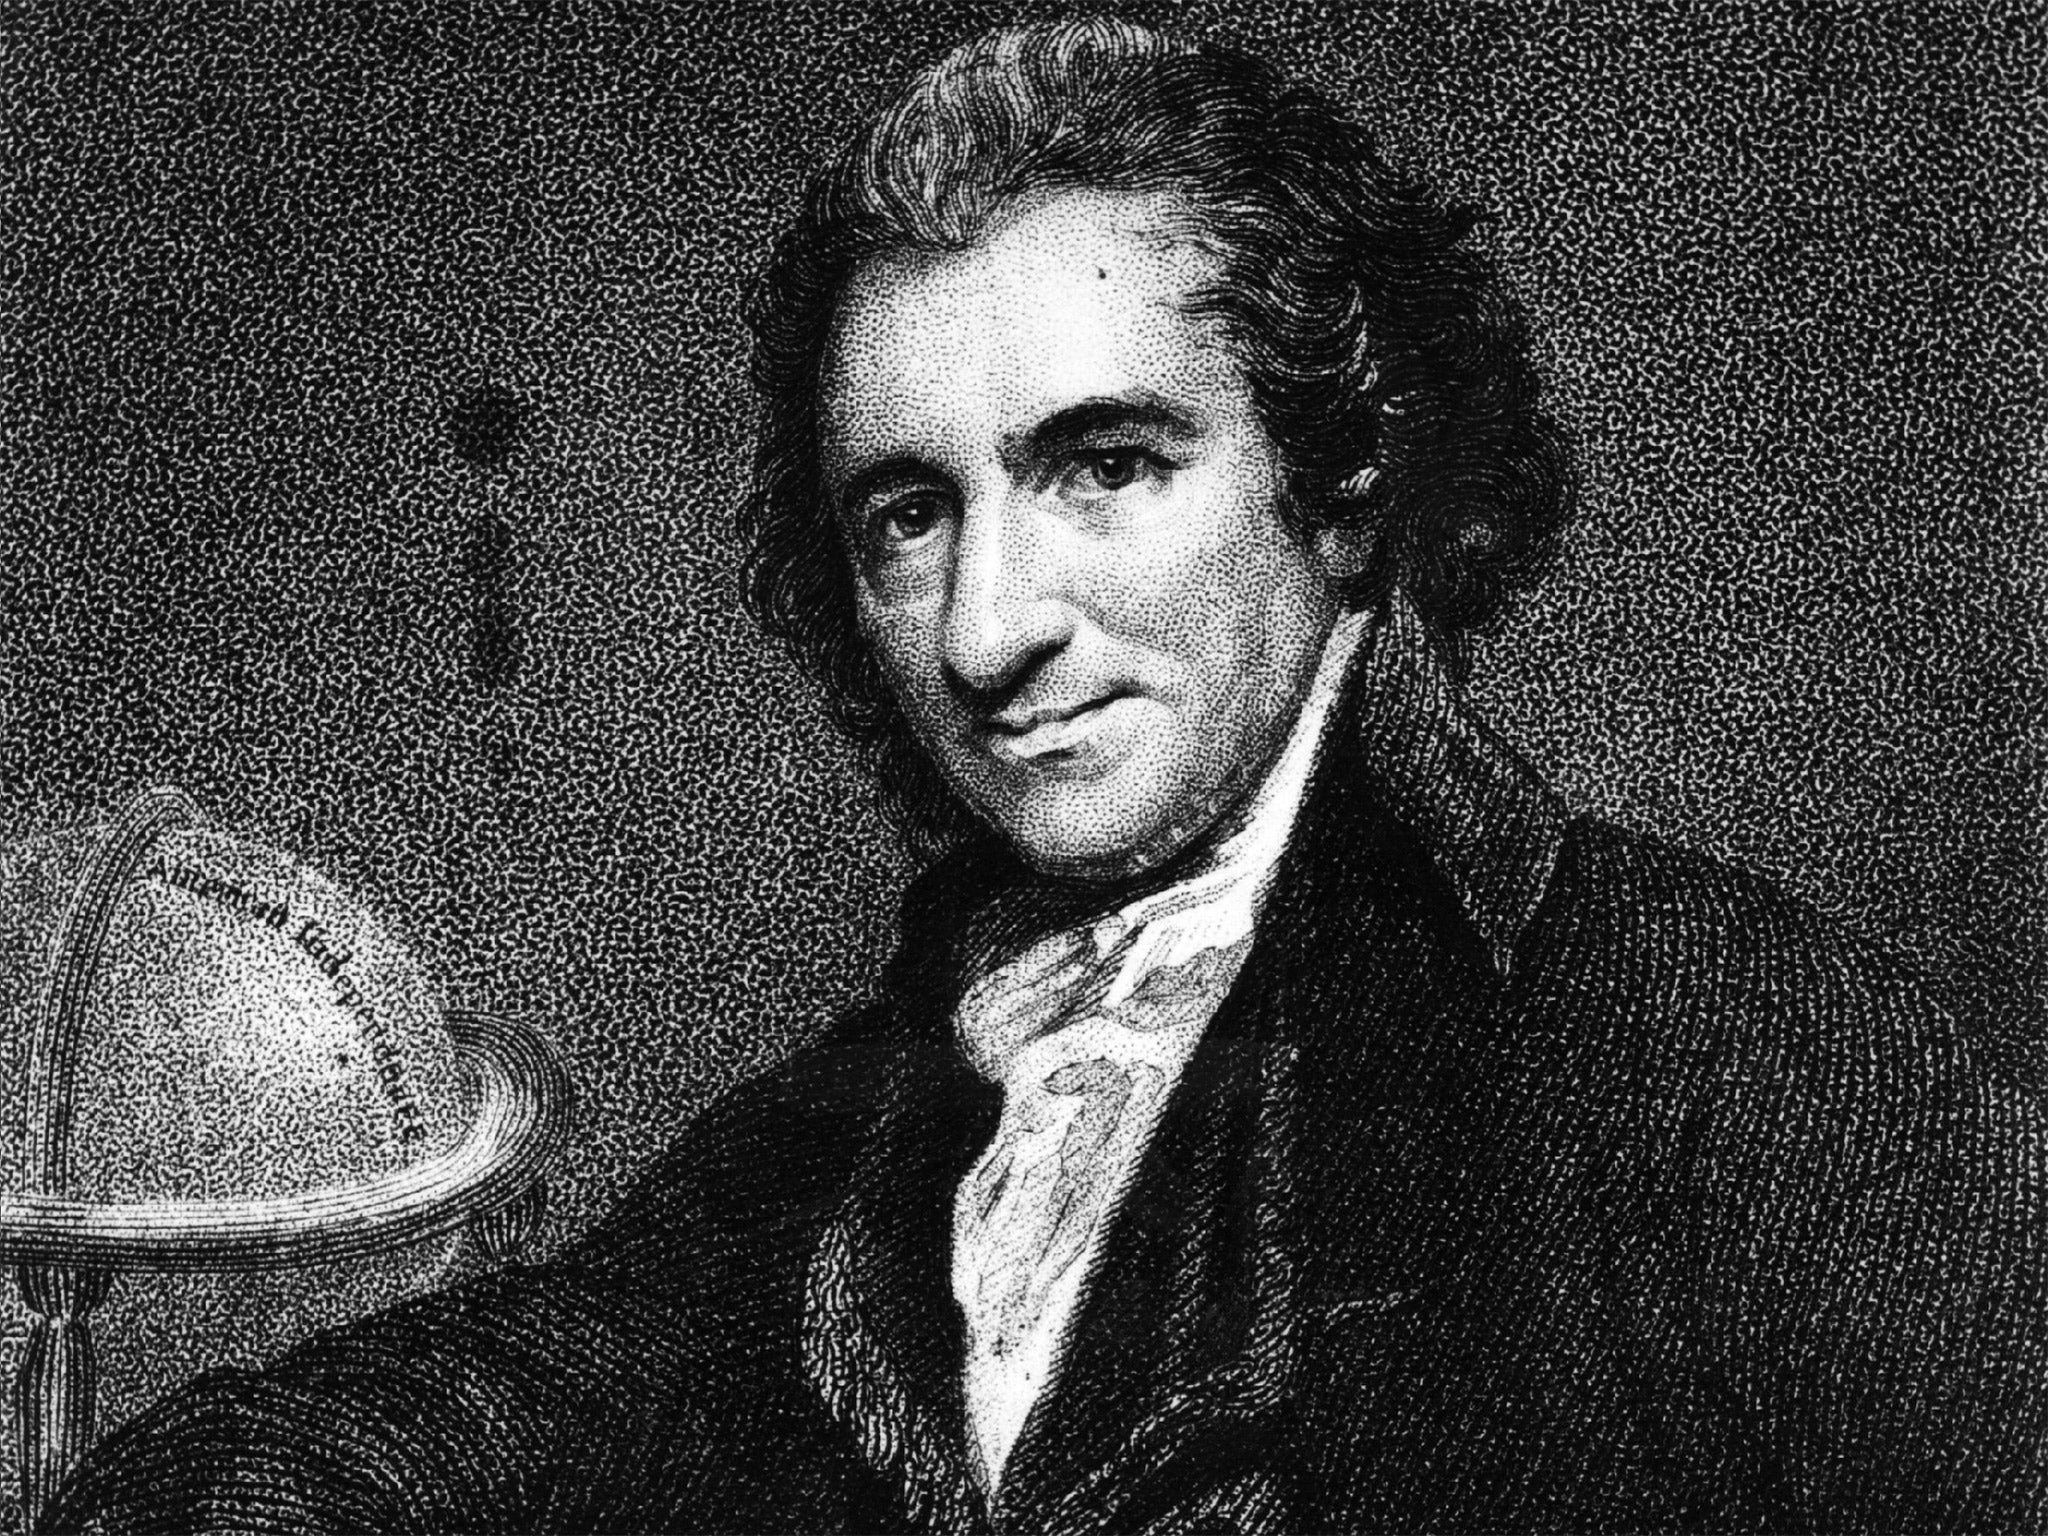 A new essay claims that a passage in ‘Rights of Man’ was not written by Thomas Paine